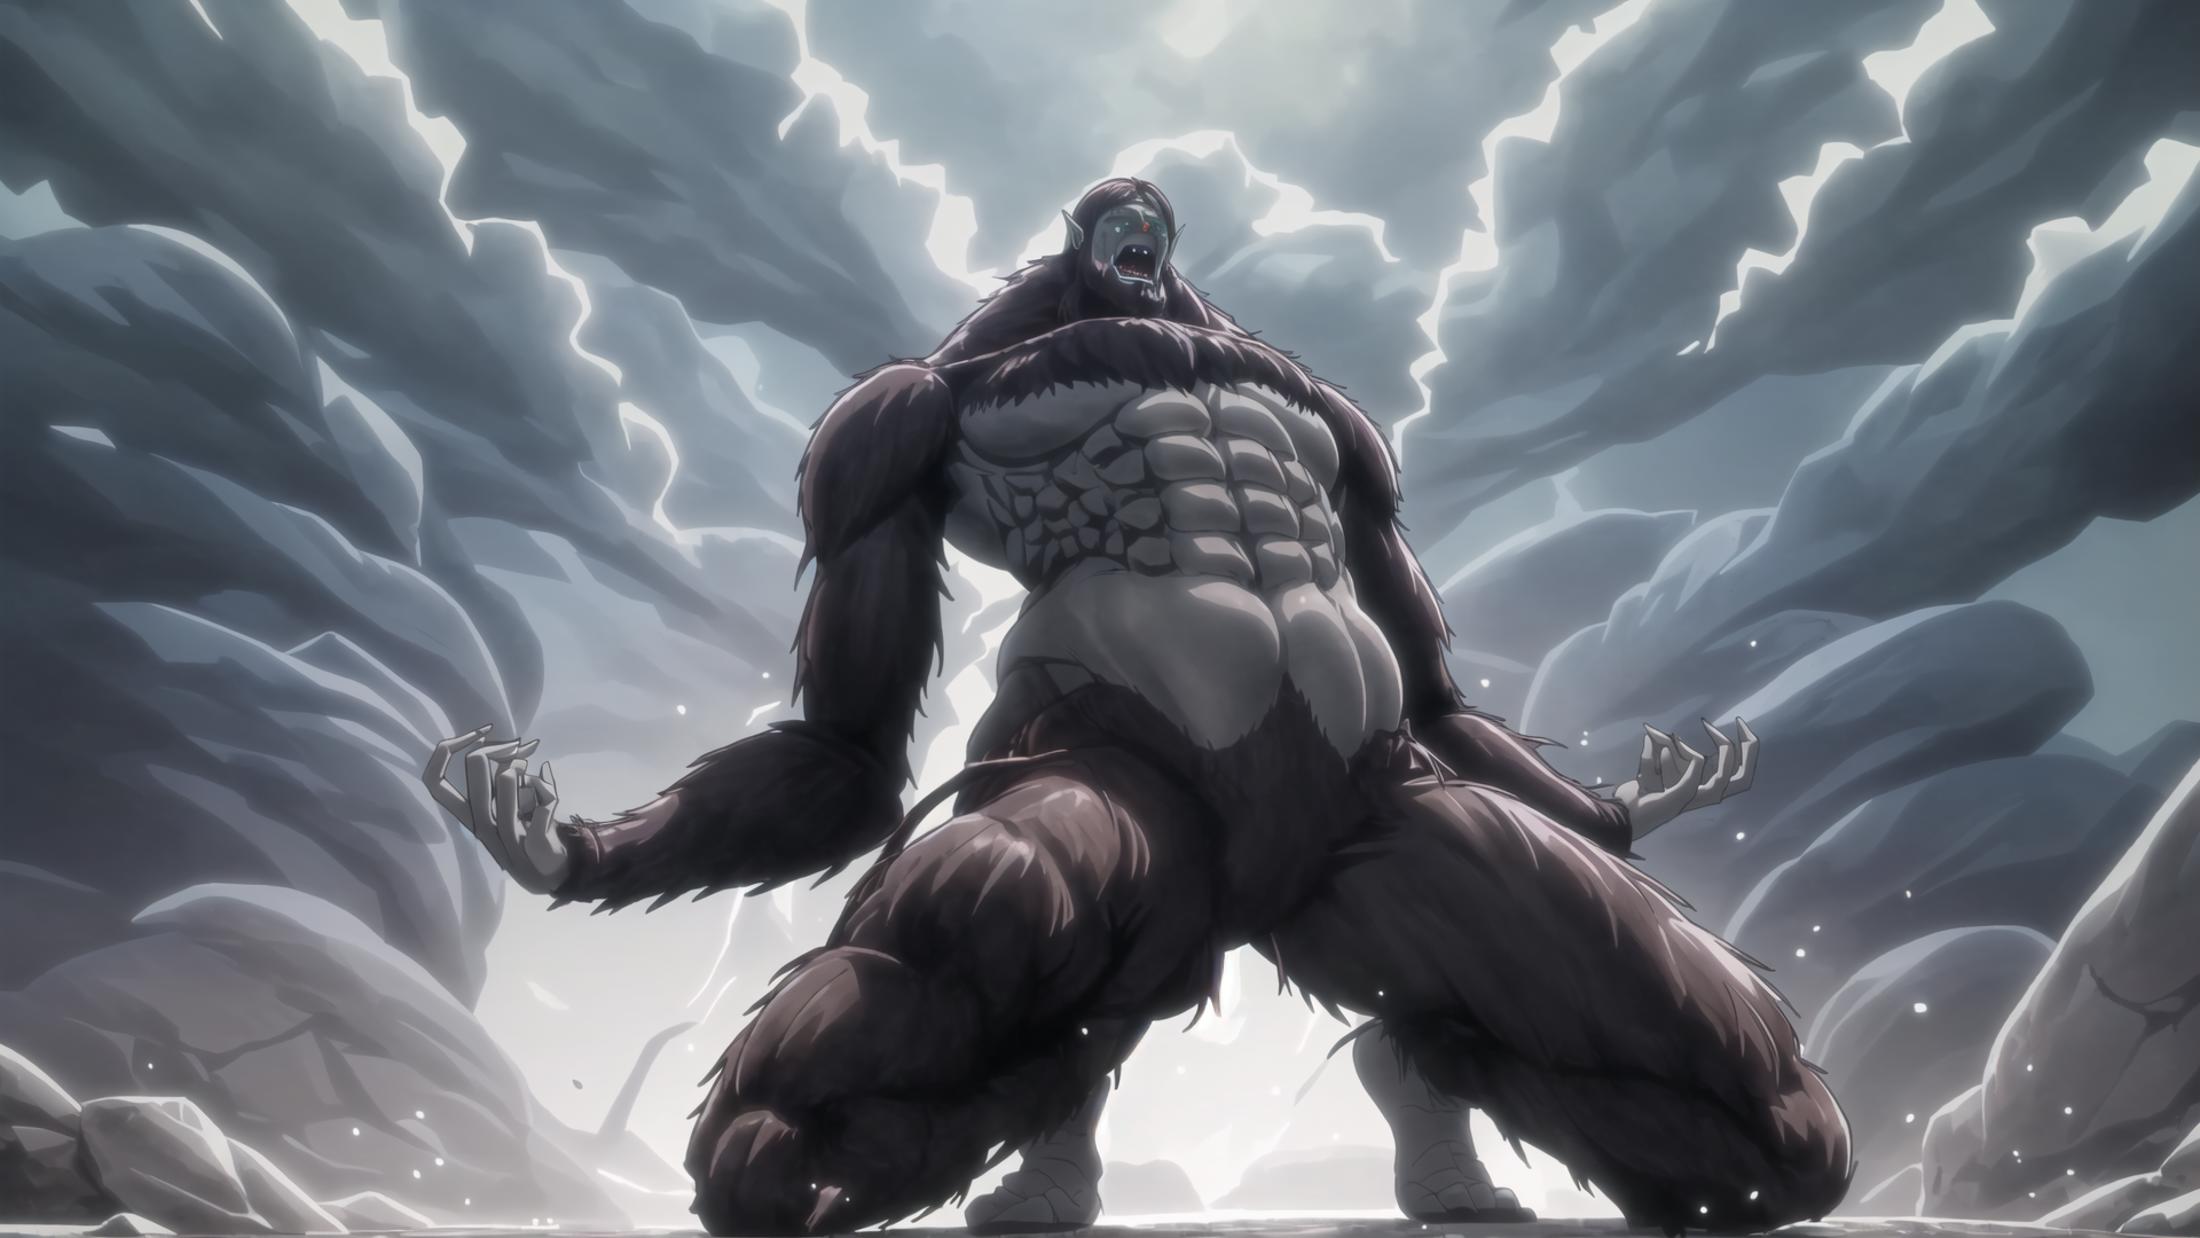 A Furry Giant Monster with Muscles and Tusks